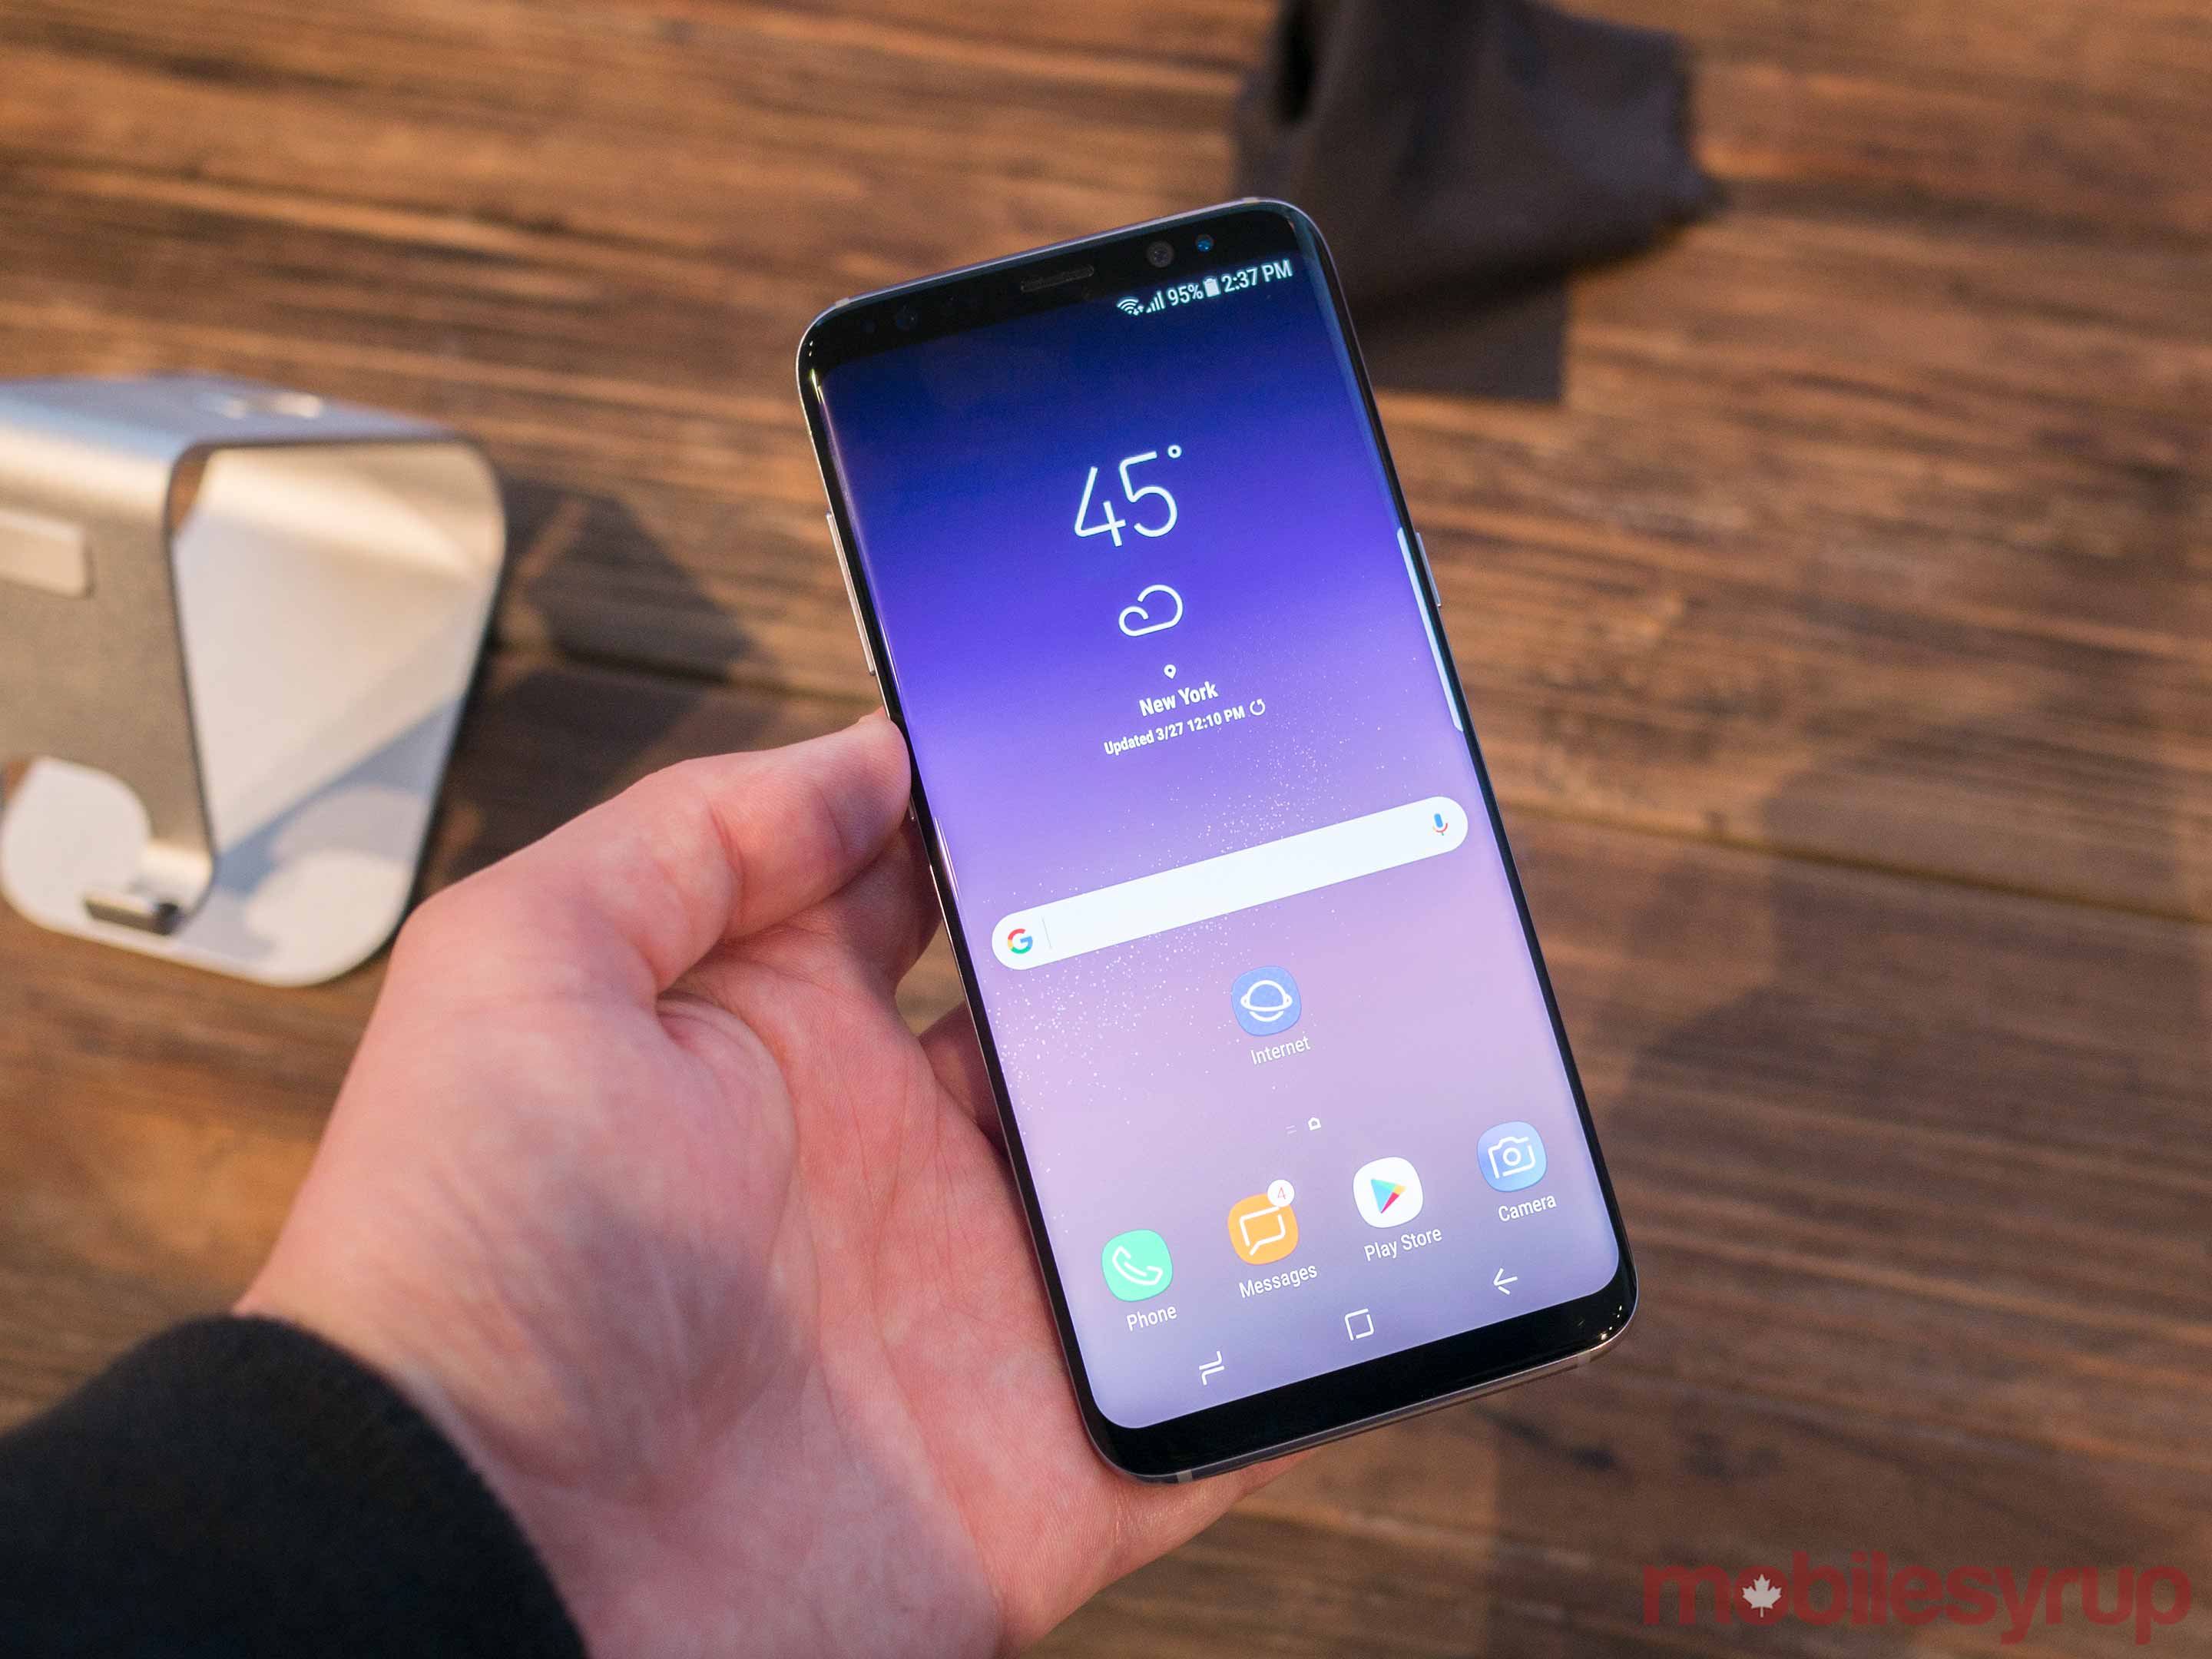 S8 in hand